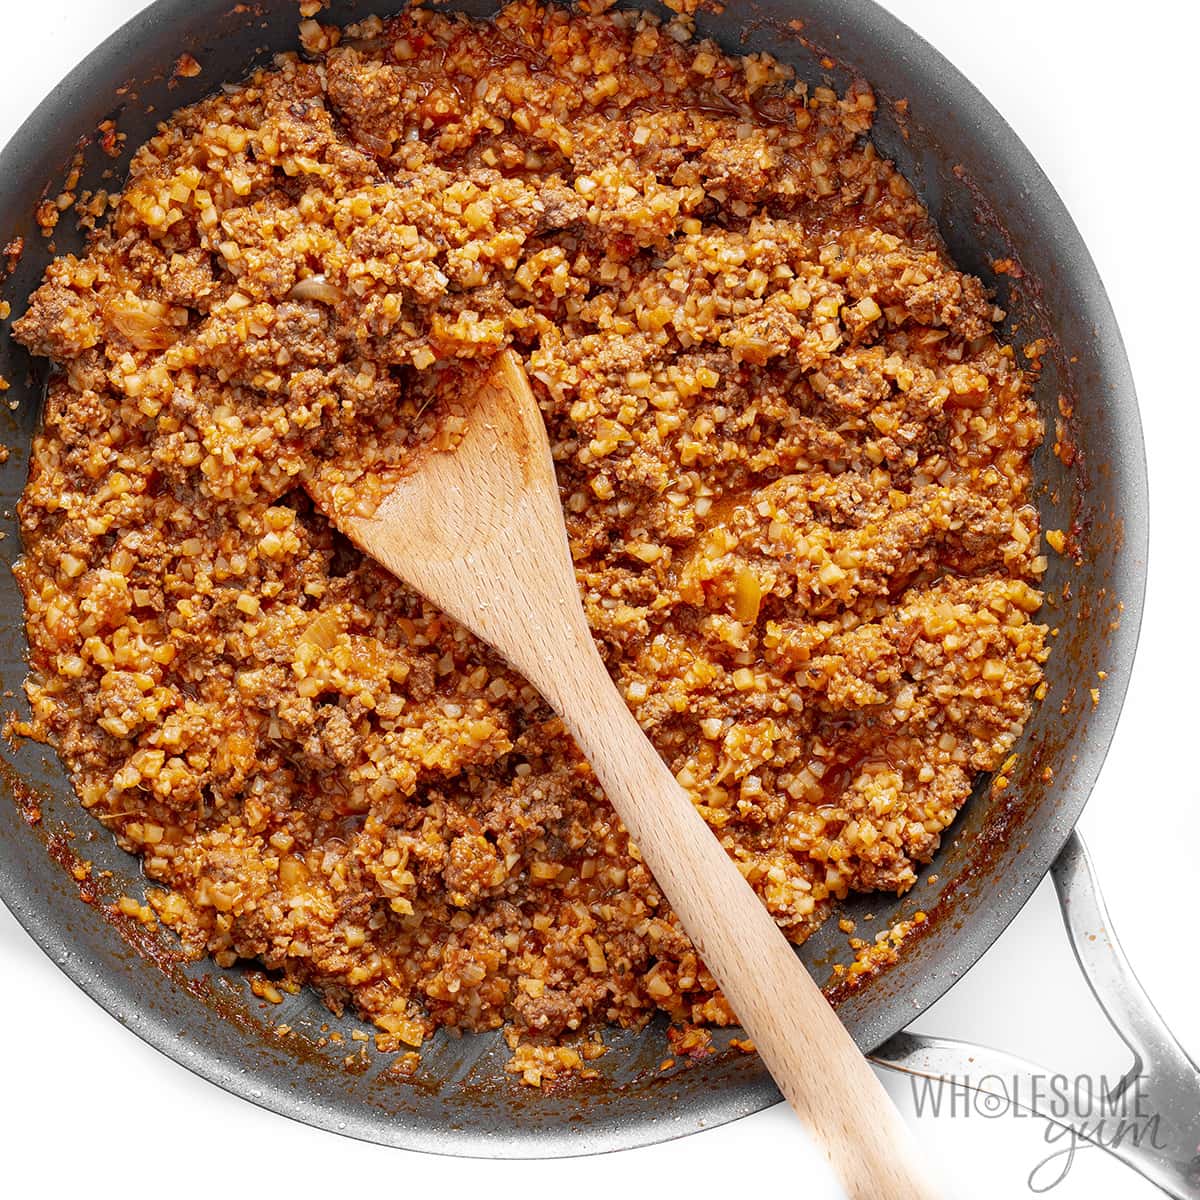 Ground beef and sauce mixture in a skillet.